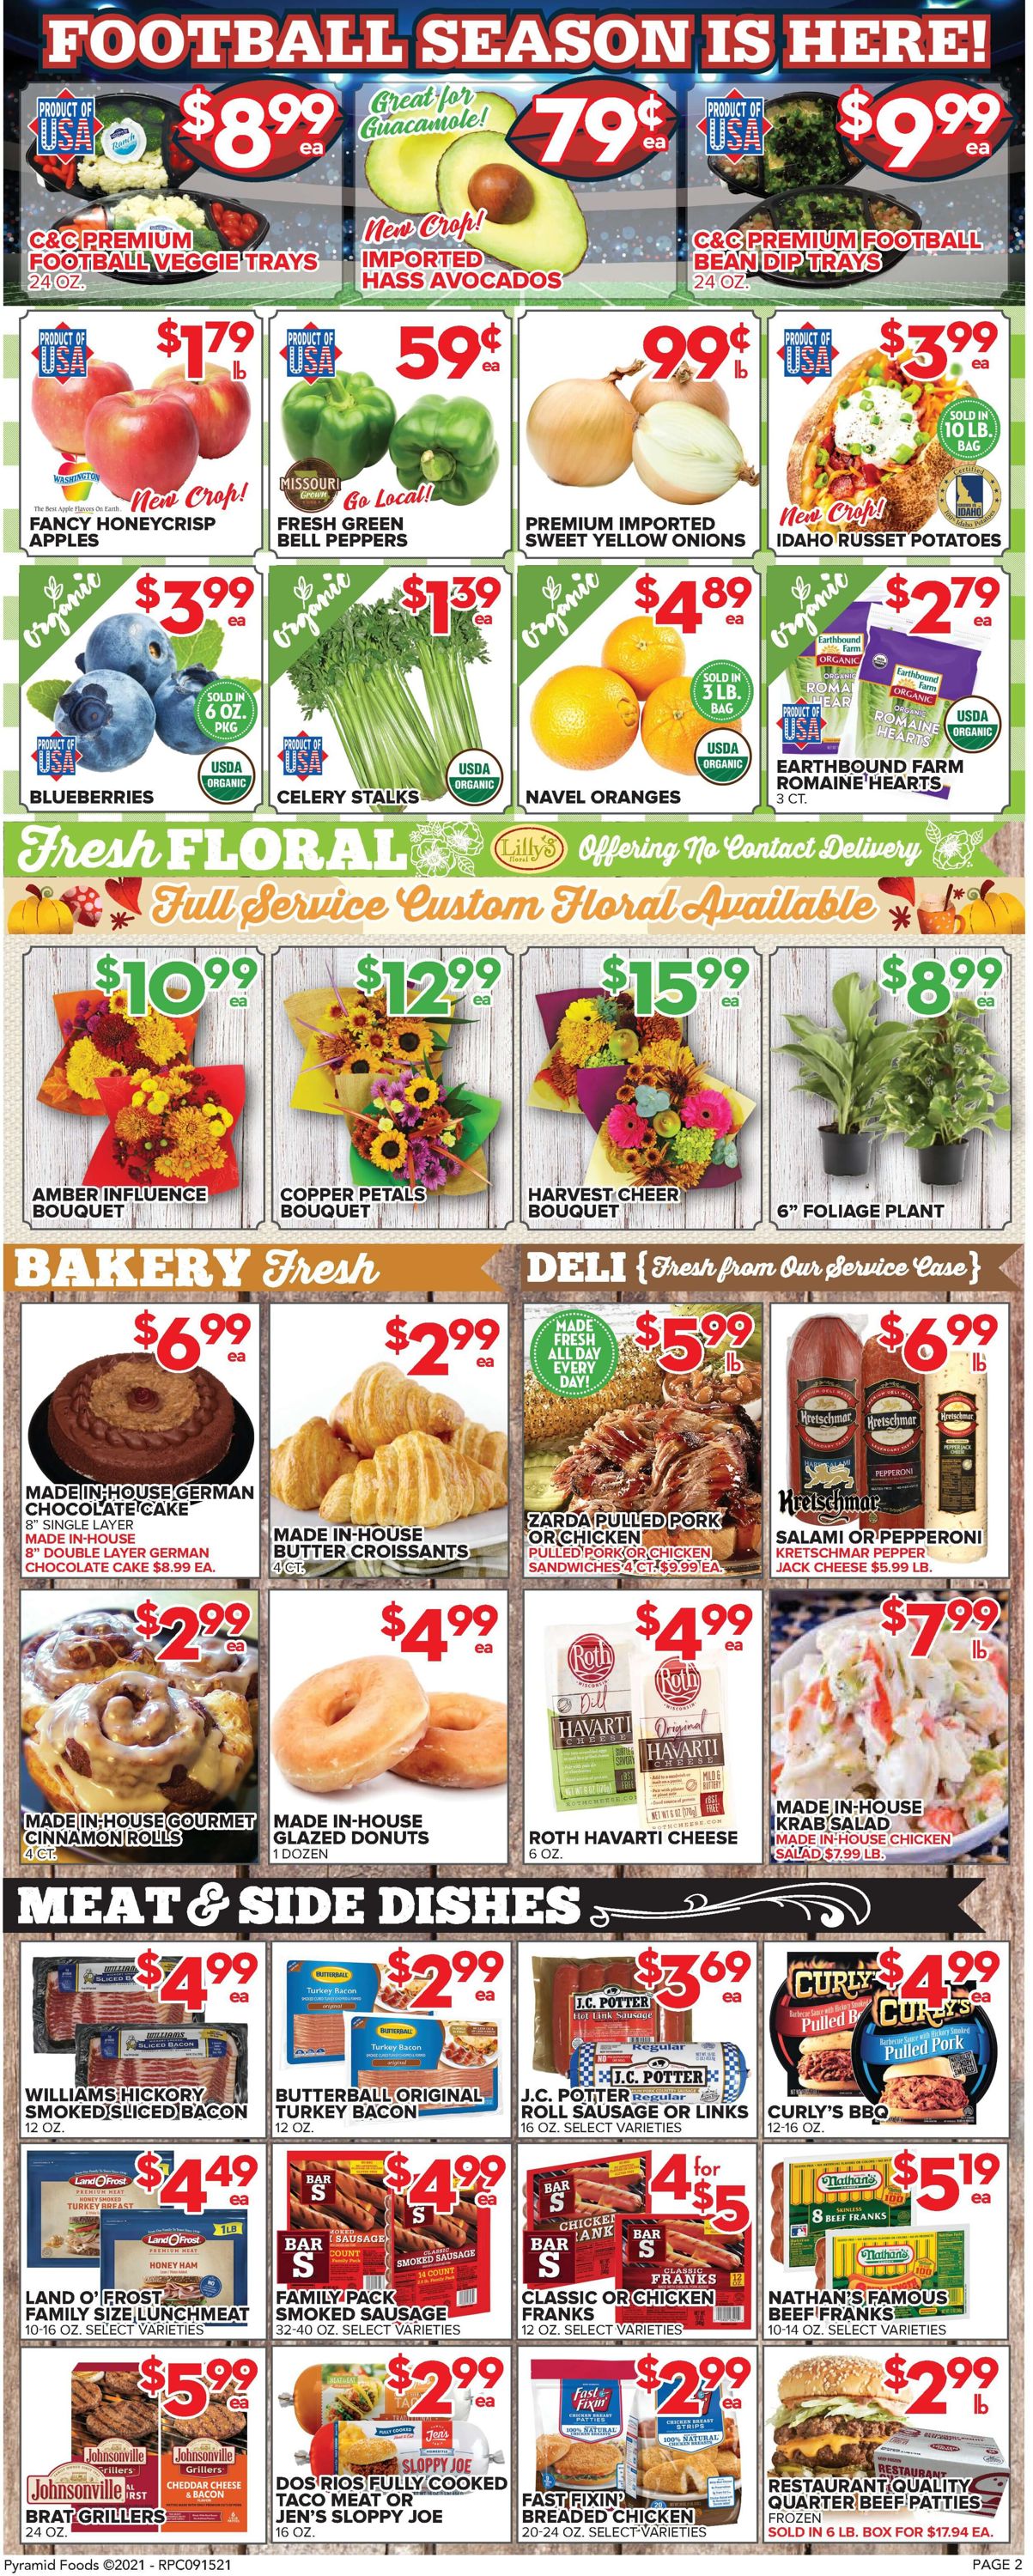 Price Cutter Weekly Ad Circular - valid 09/15-09/21/2021 (Page 2)